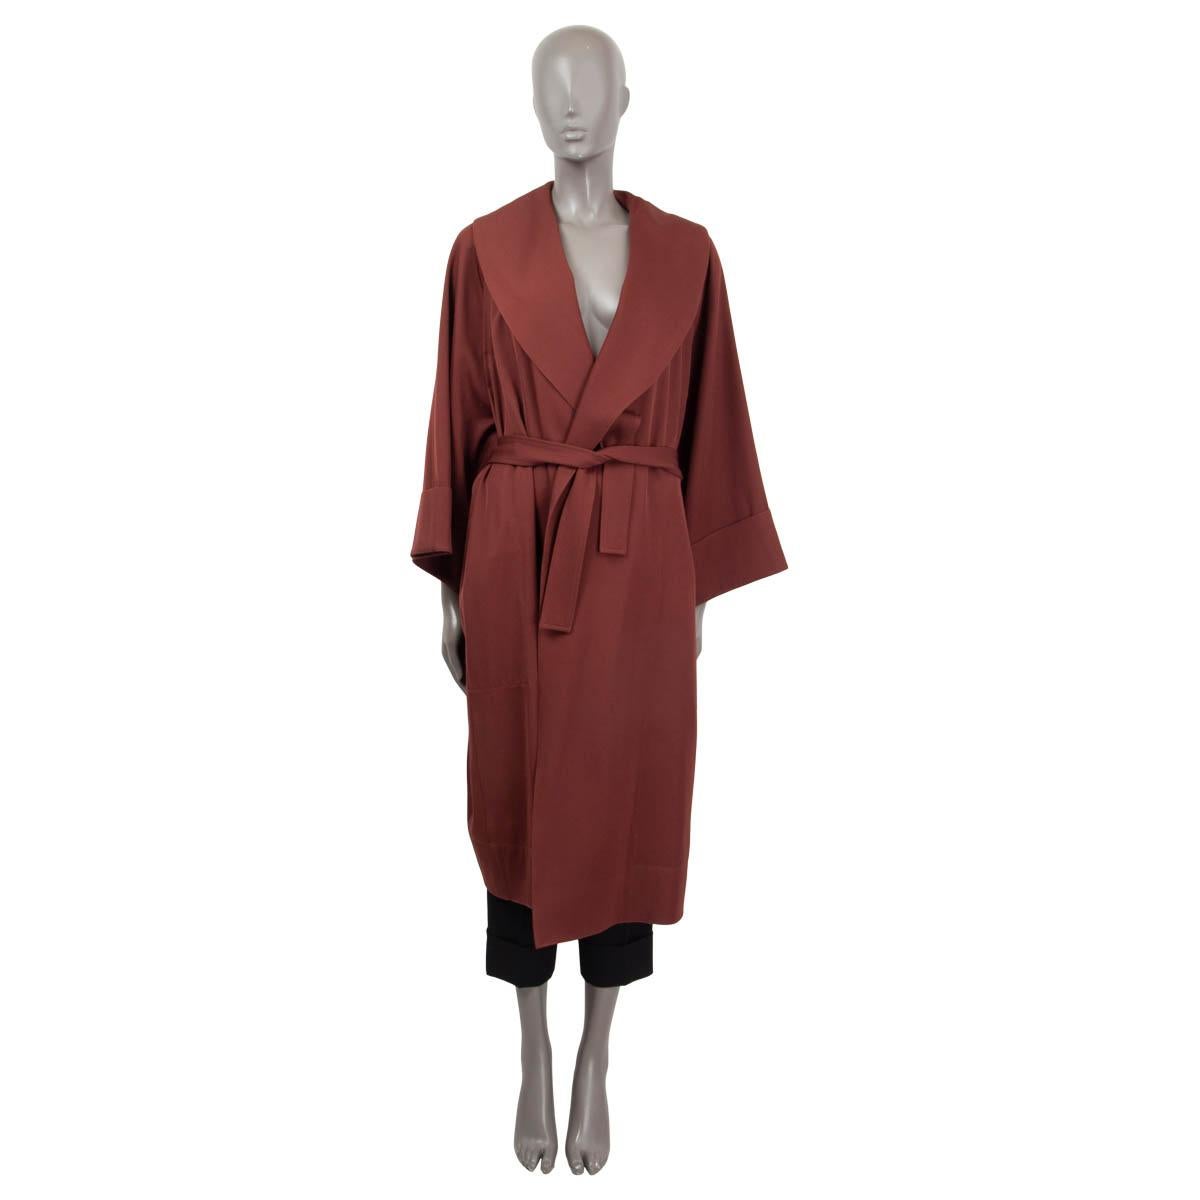 100% authentic The Row oversized belted wrap coat in burgundy wool (assumed cause tag is missing). Features 7/8 sleeves and two side slit pockets. Unlined. Shows a barely visible scratch on the back, otherwise in excellent